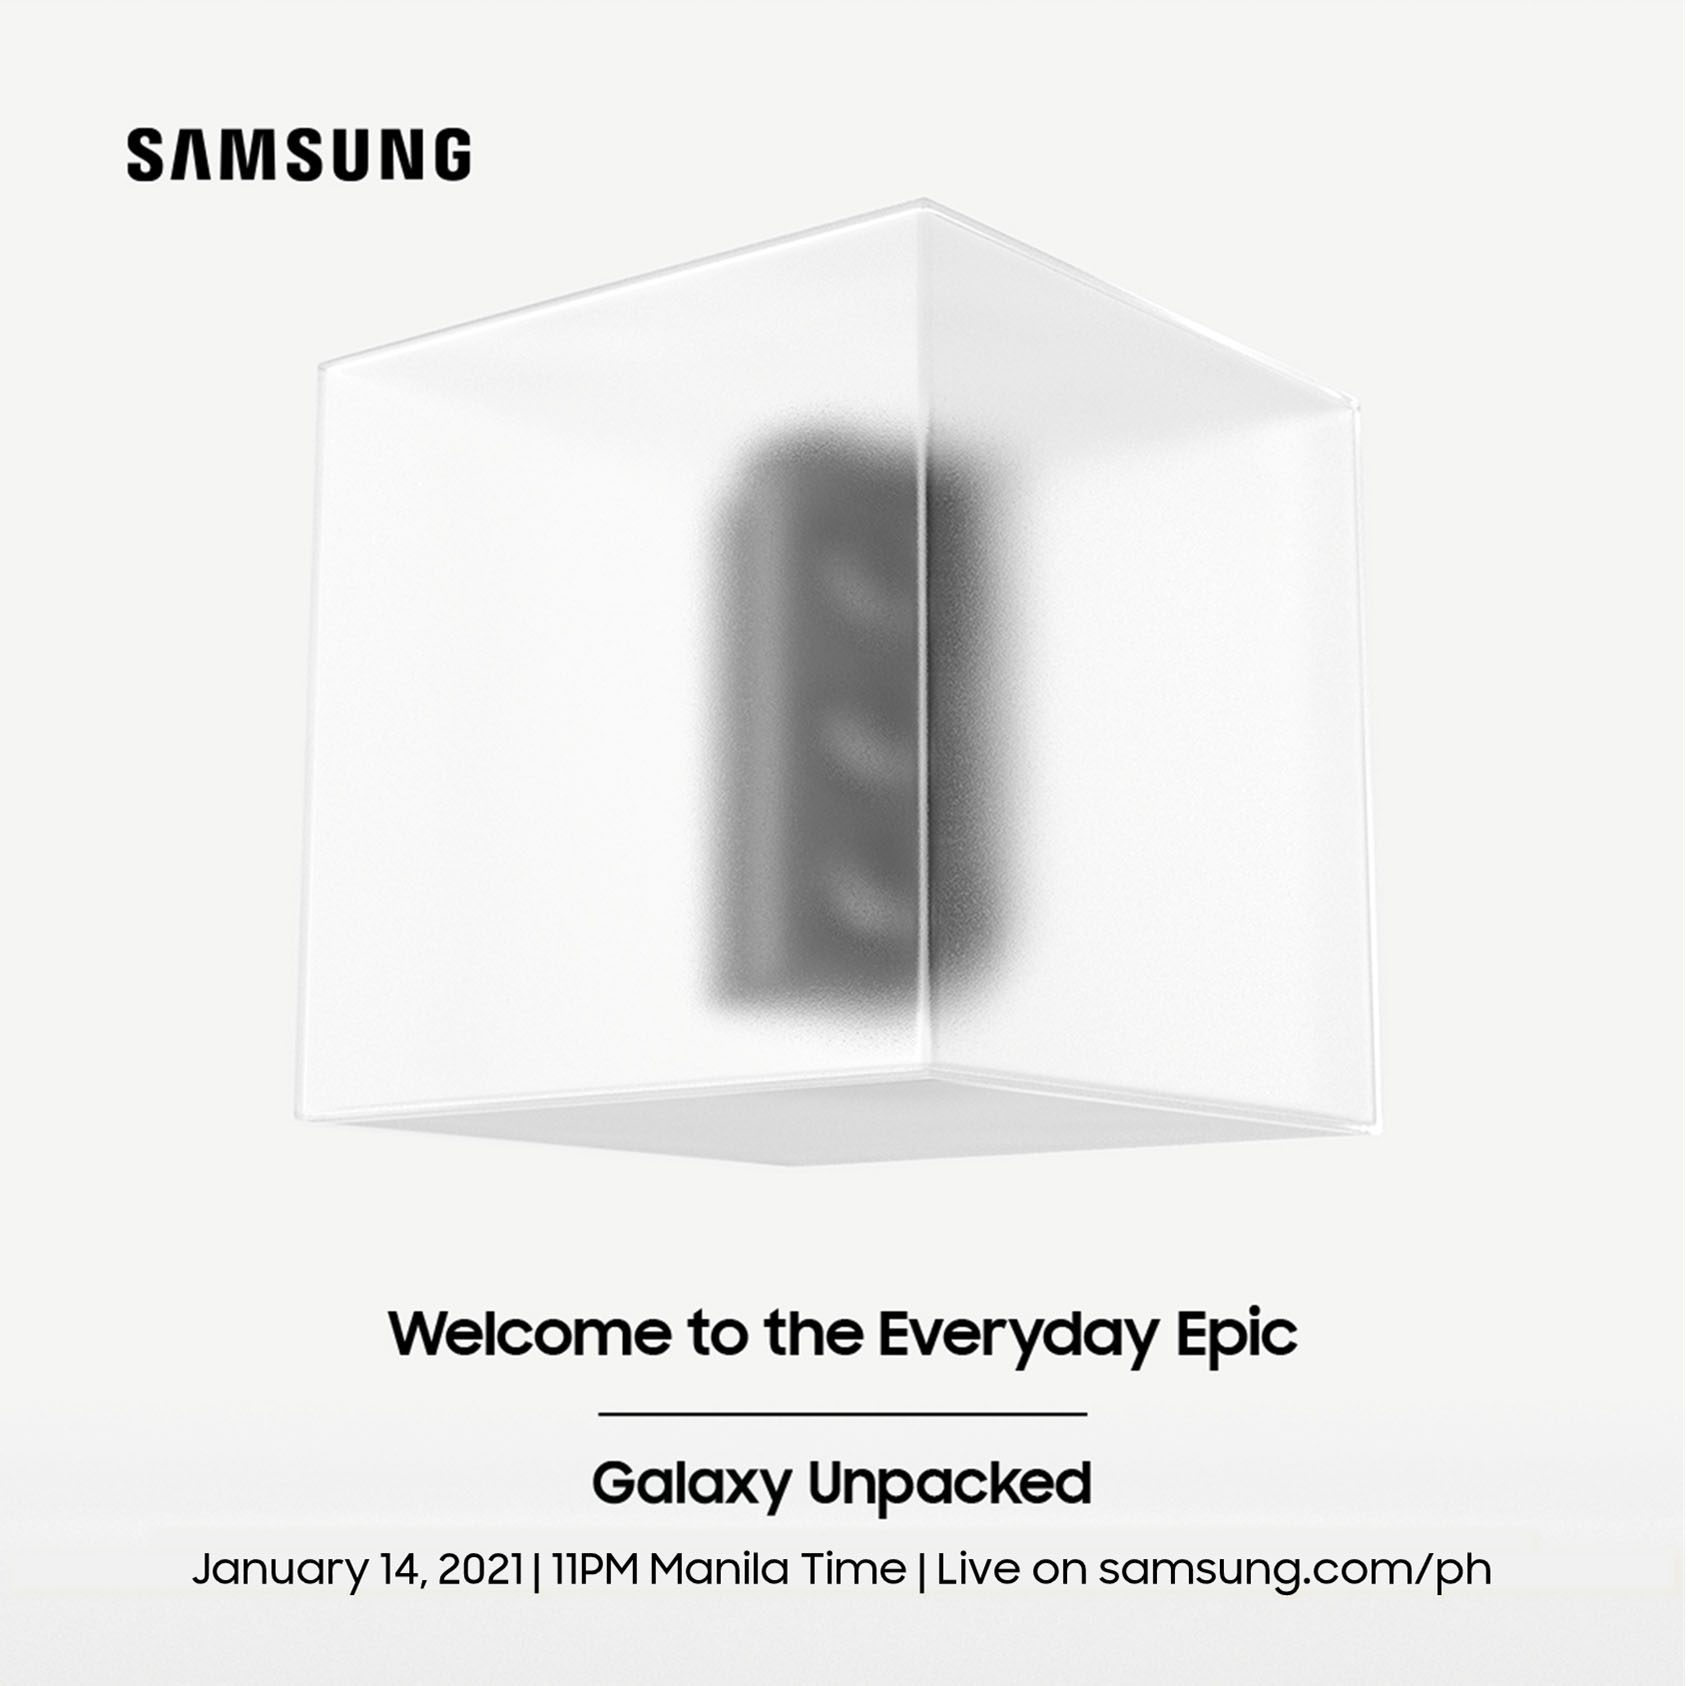 Something EPIC is coming our way at the Galaxy Unpacked on January 14!